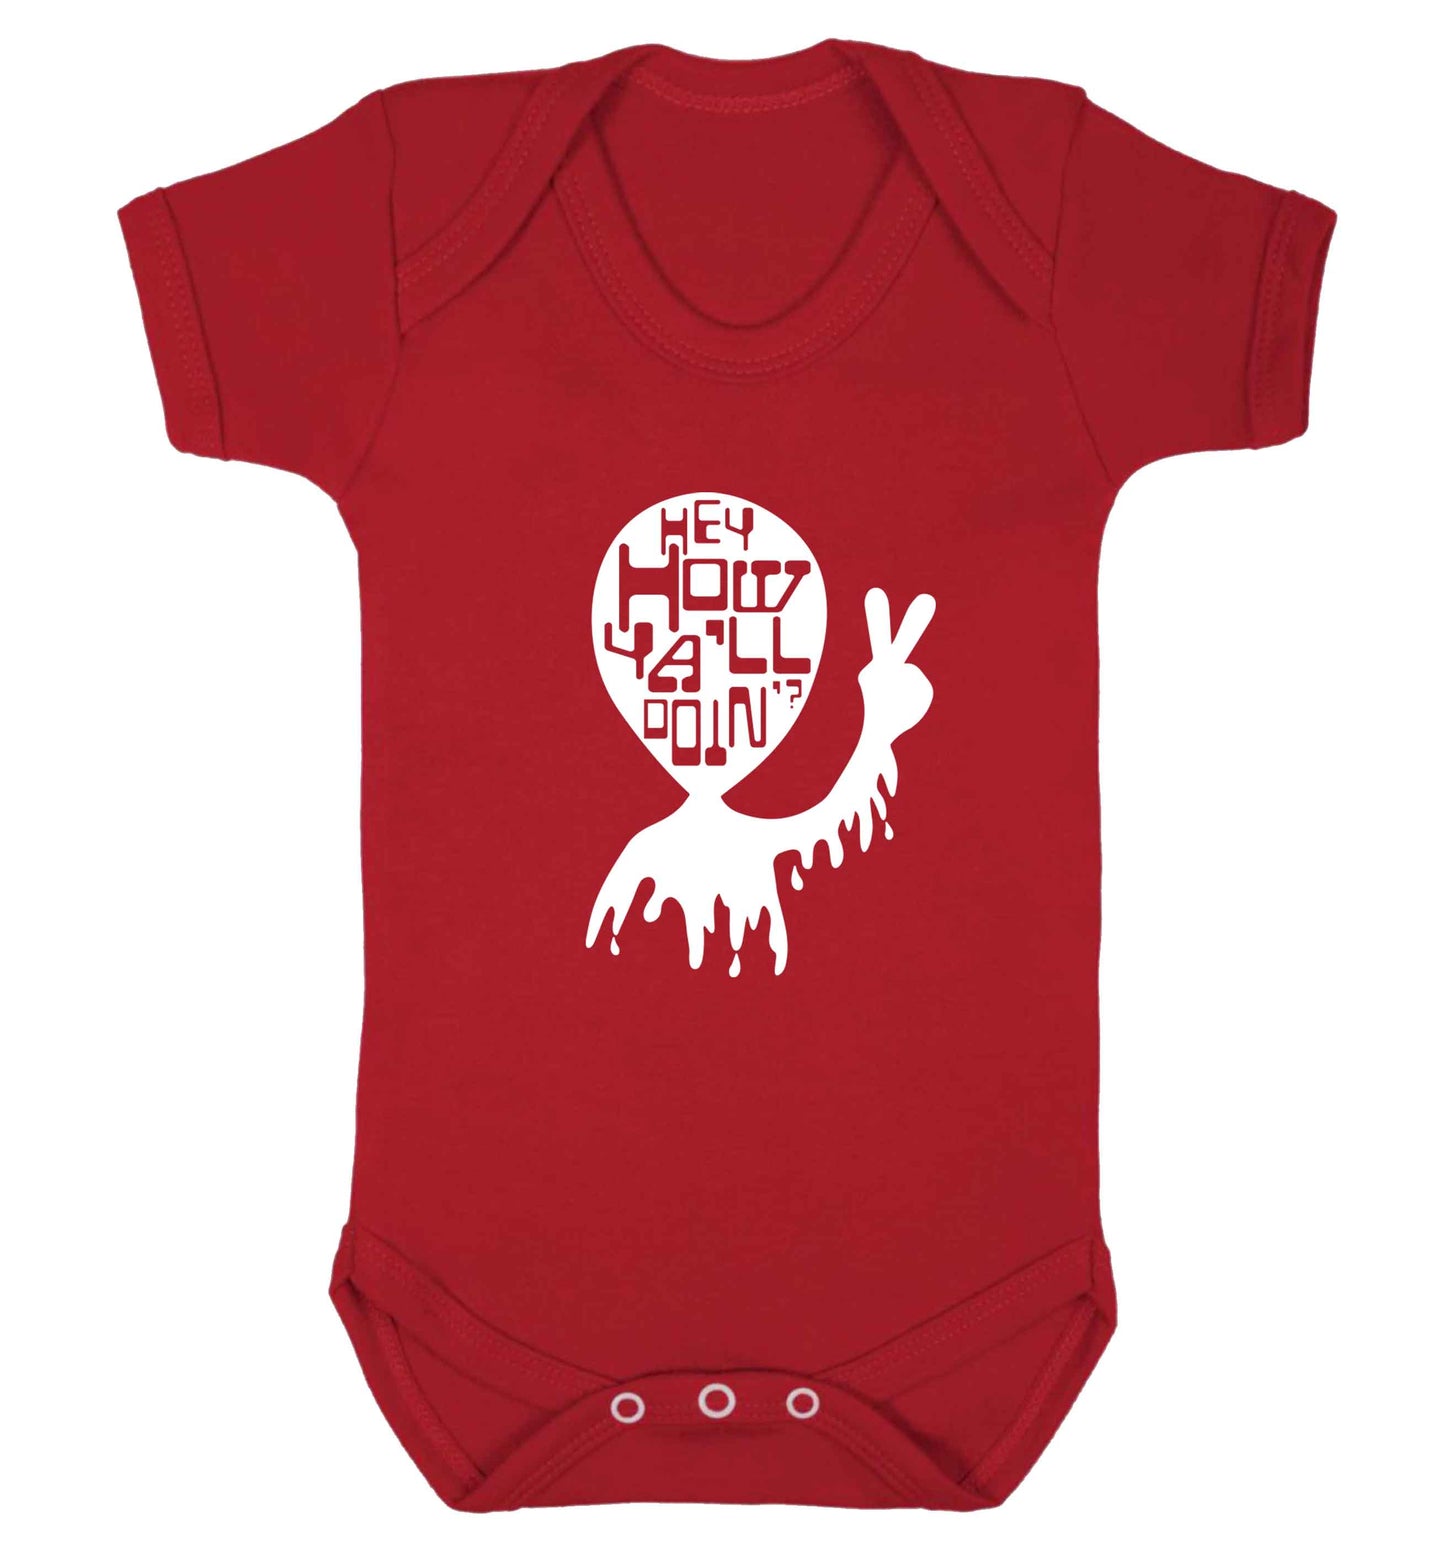 Misheard song lyrics - check!  baby vest red 18-24 months